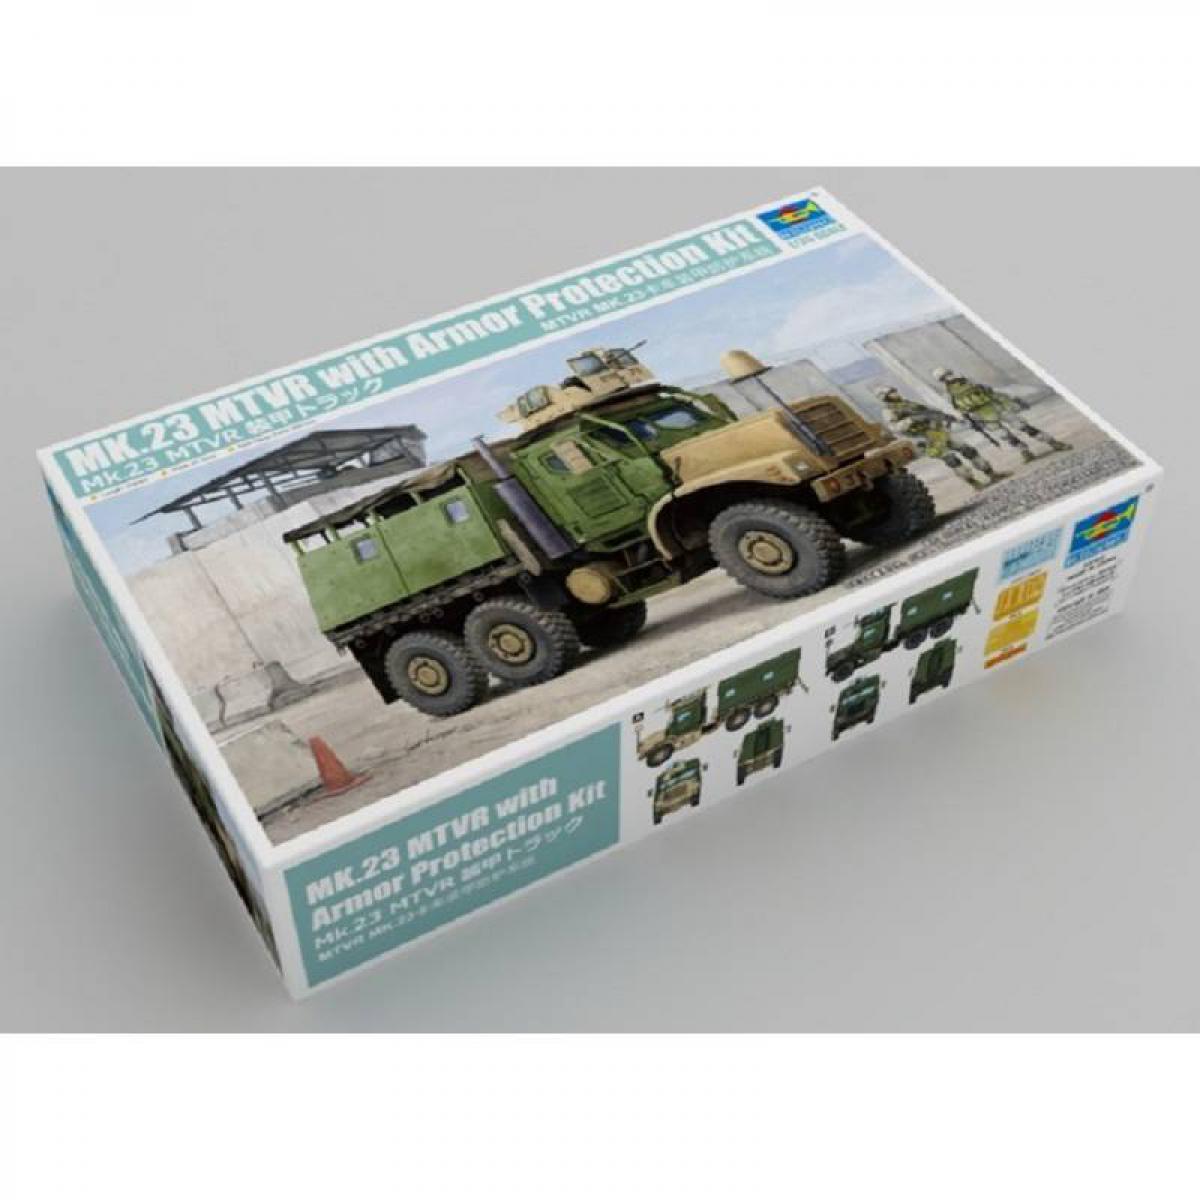 Trumpeter - Maquette Camion Mk.23 Mtvr With Armor Protection - Camions